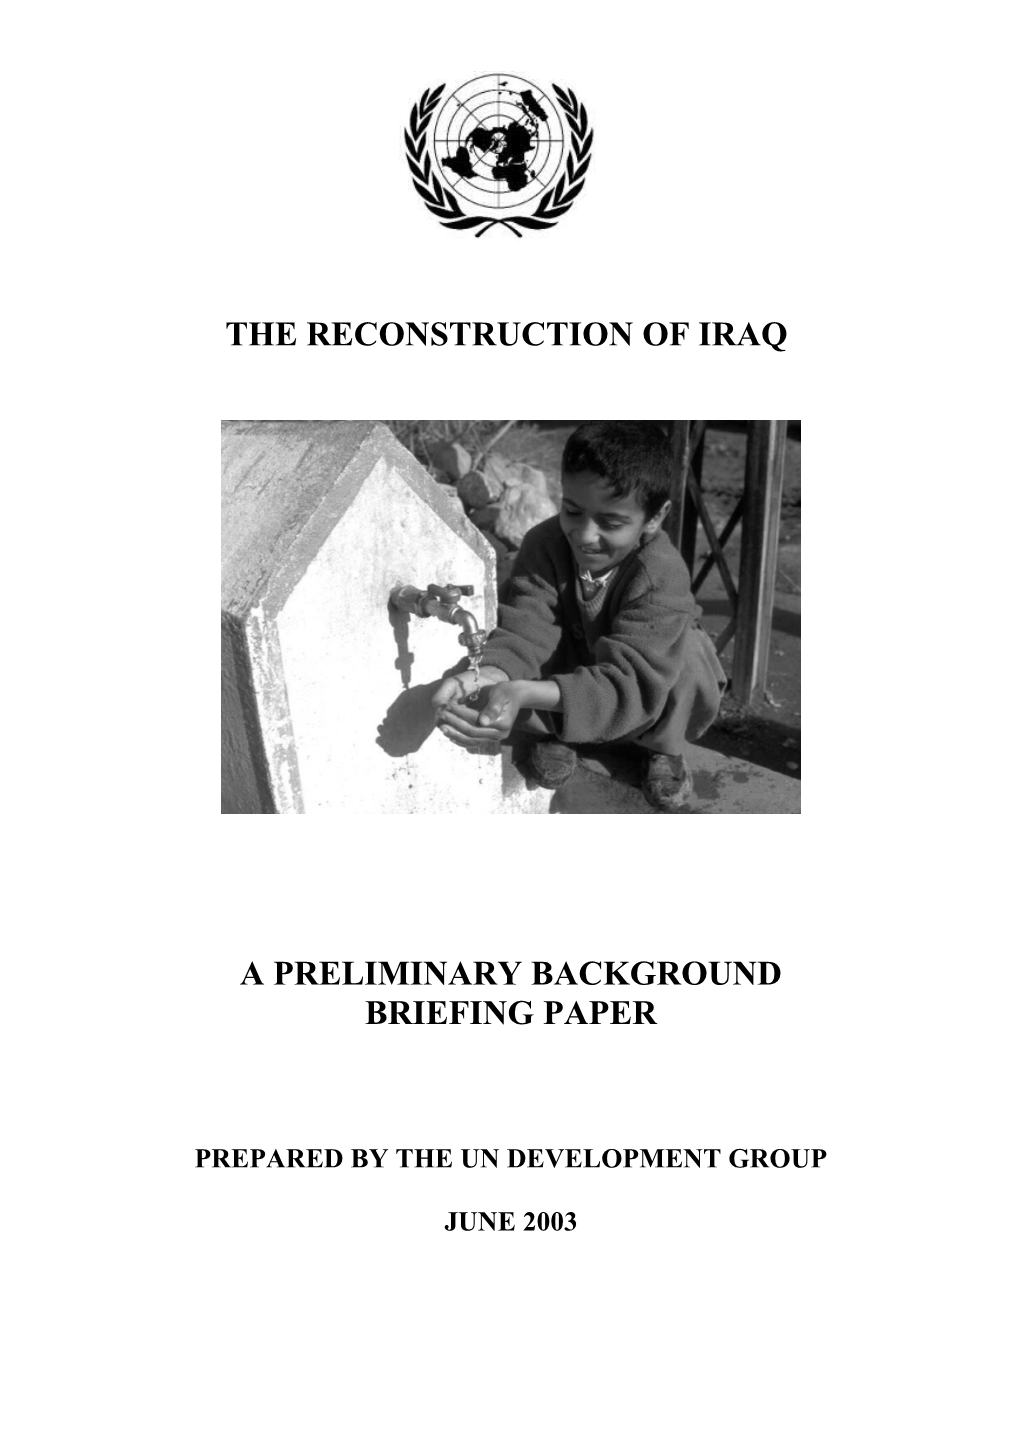 Reconstruction of Iraq Appeal